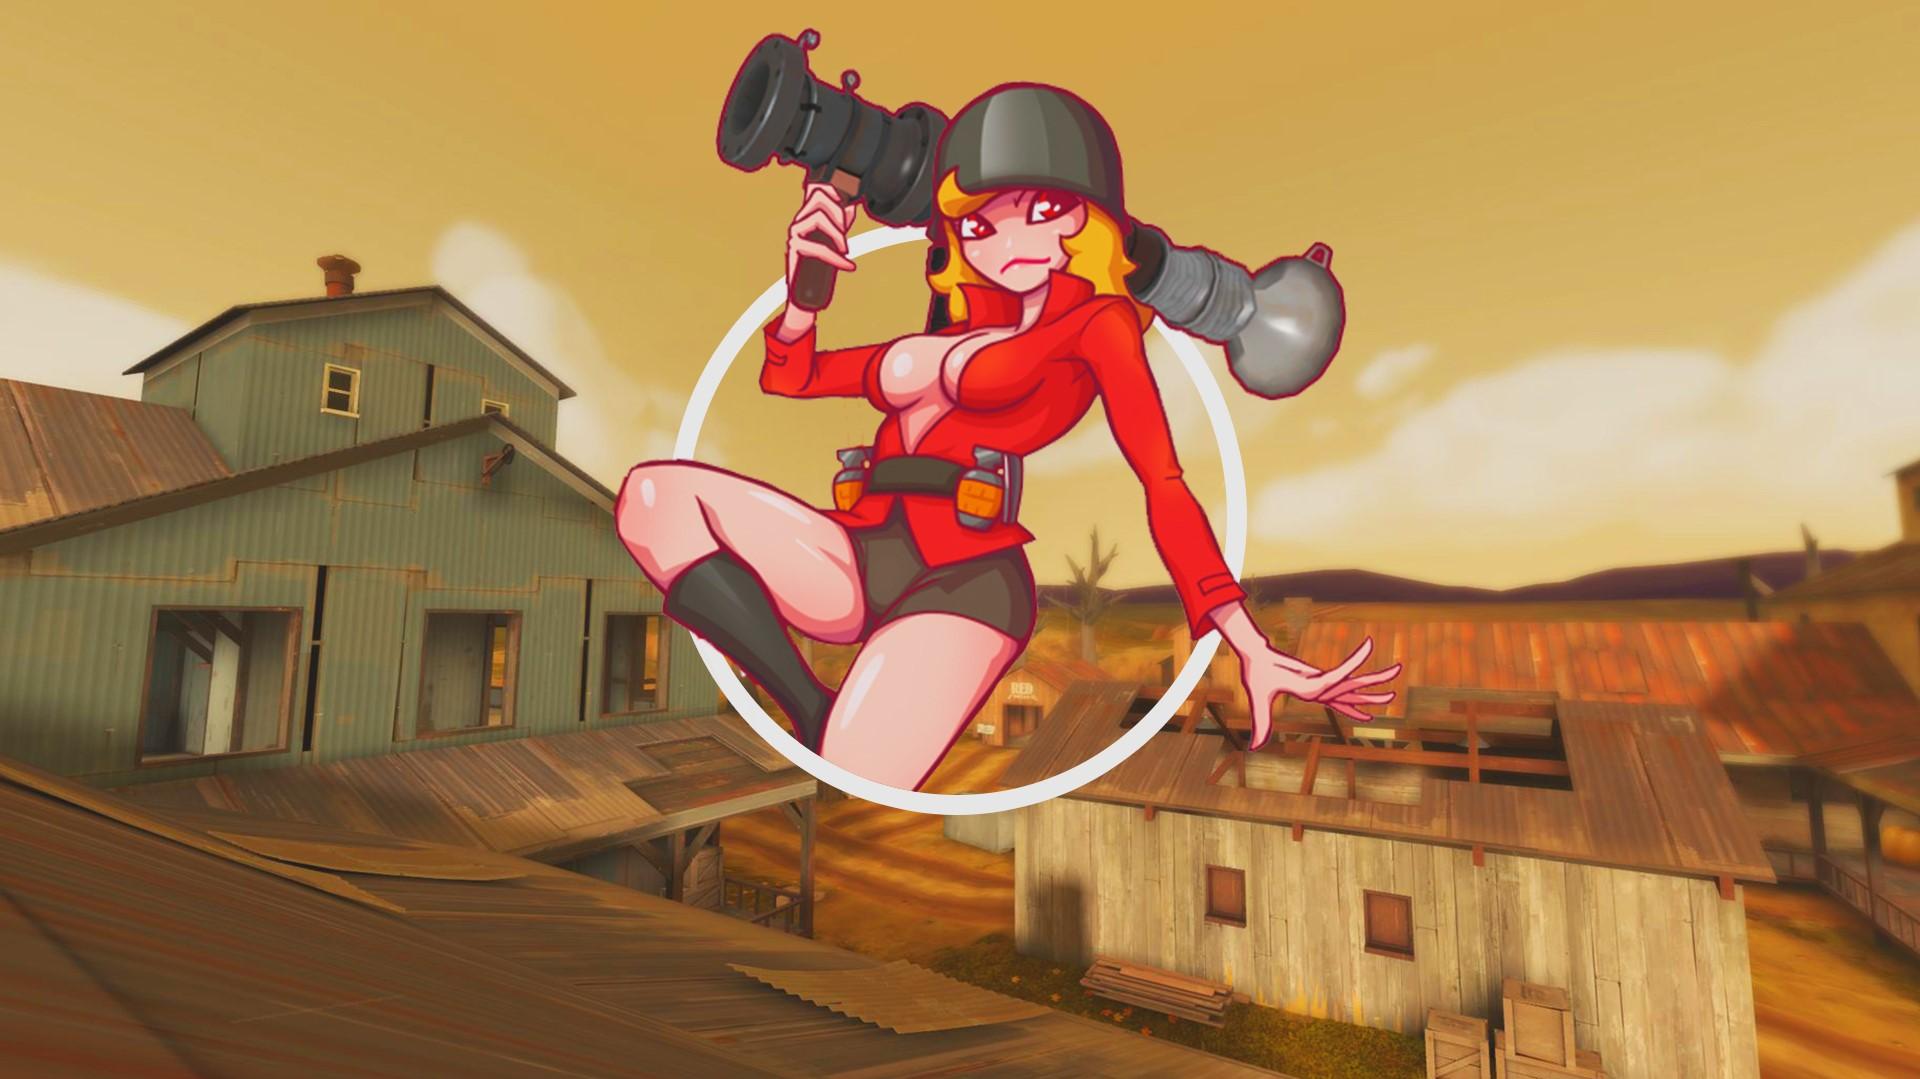 Wallpaper Id Team Fortress Soldier Tf2 Anime